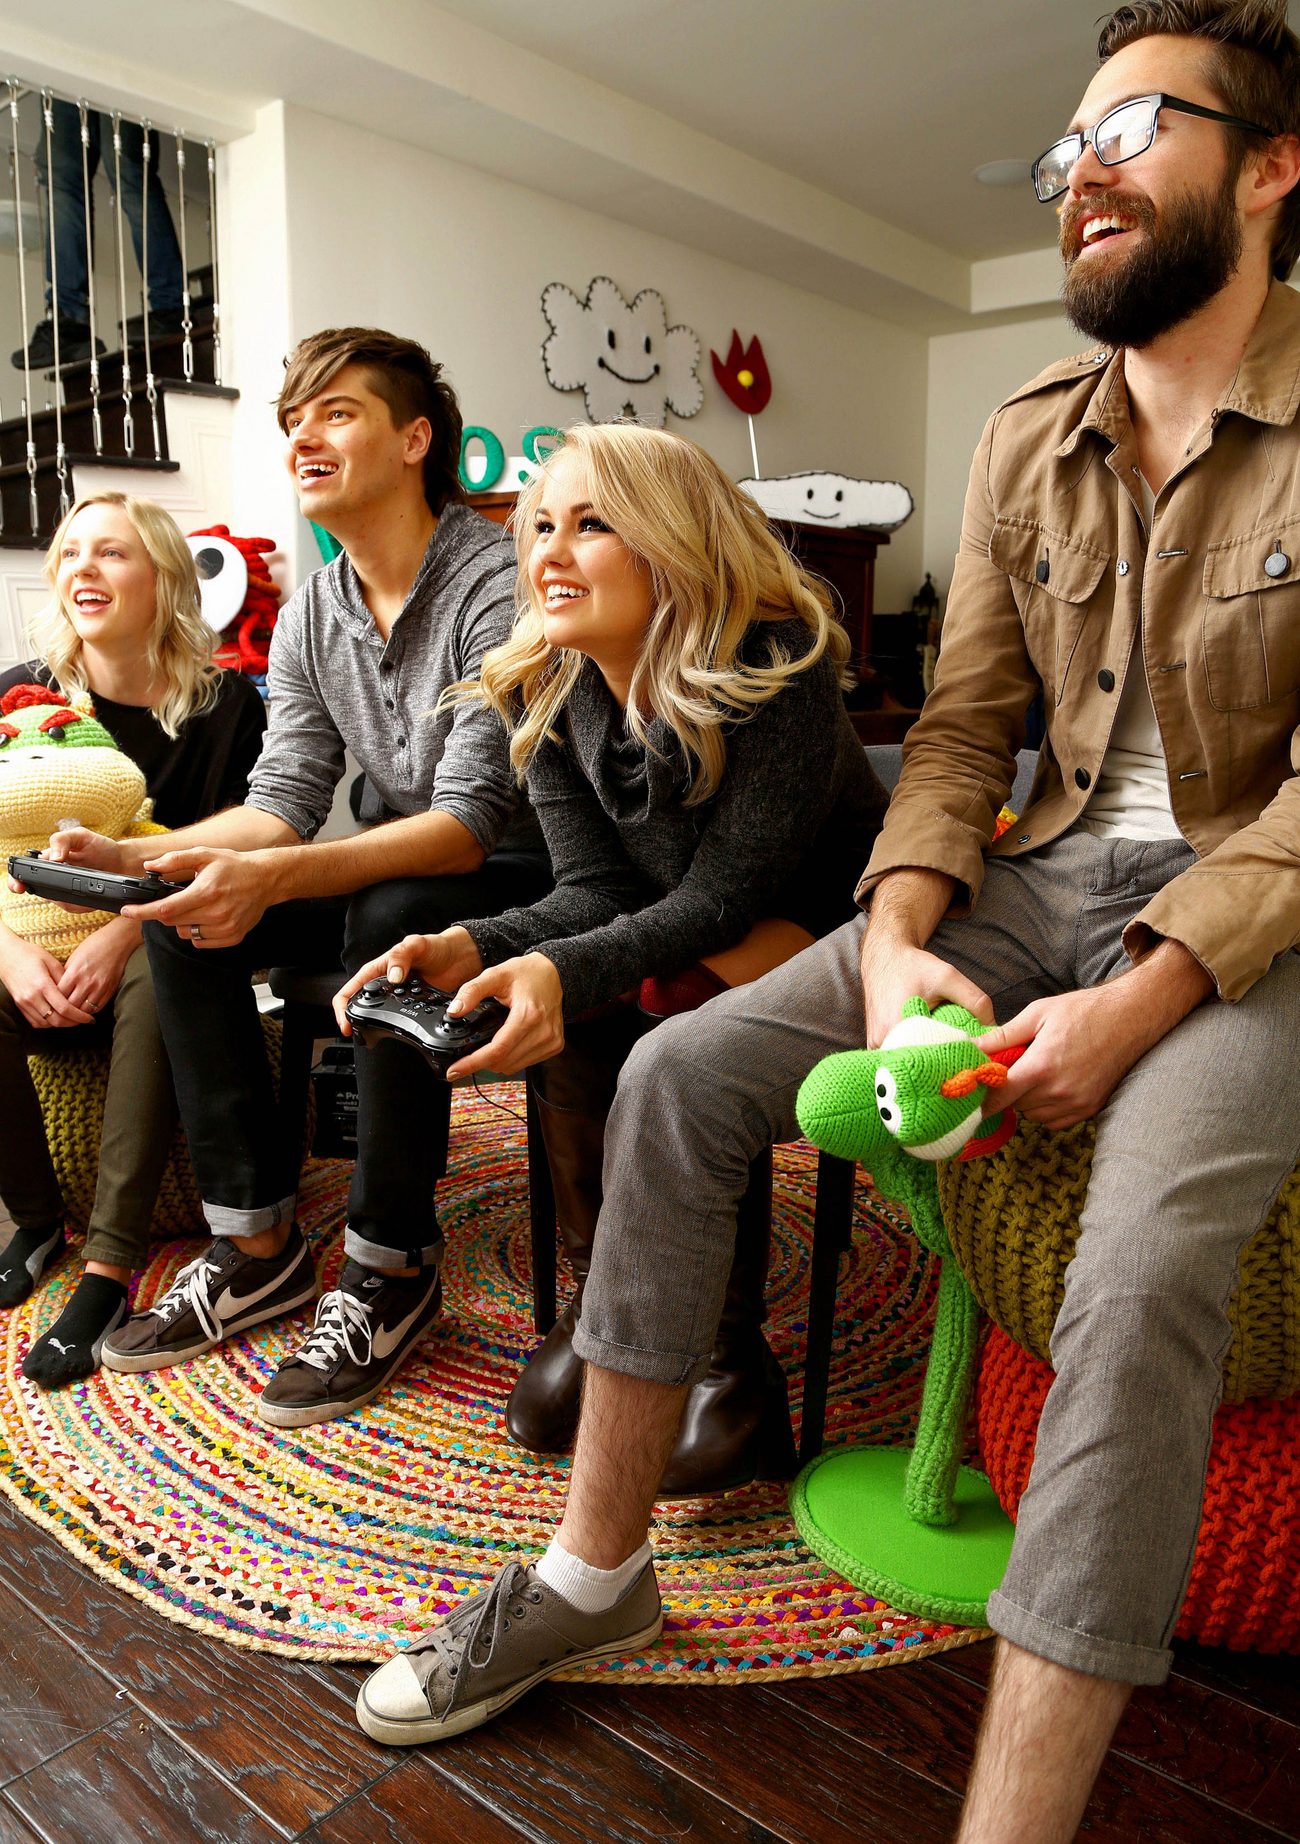 Debby Ryan Plays Nintendo With Friend at Her Home